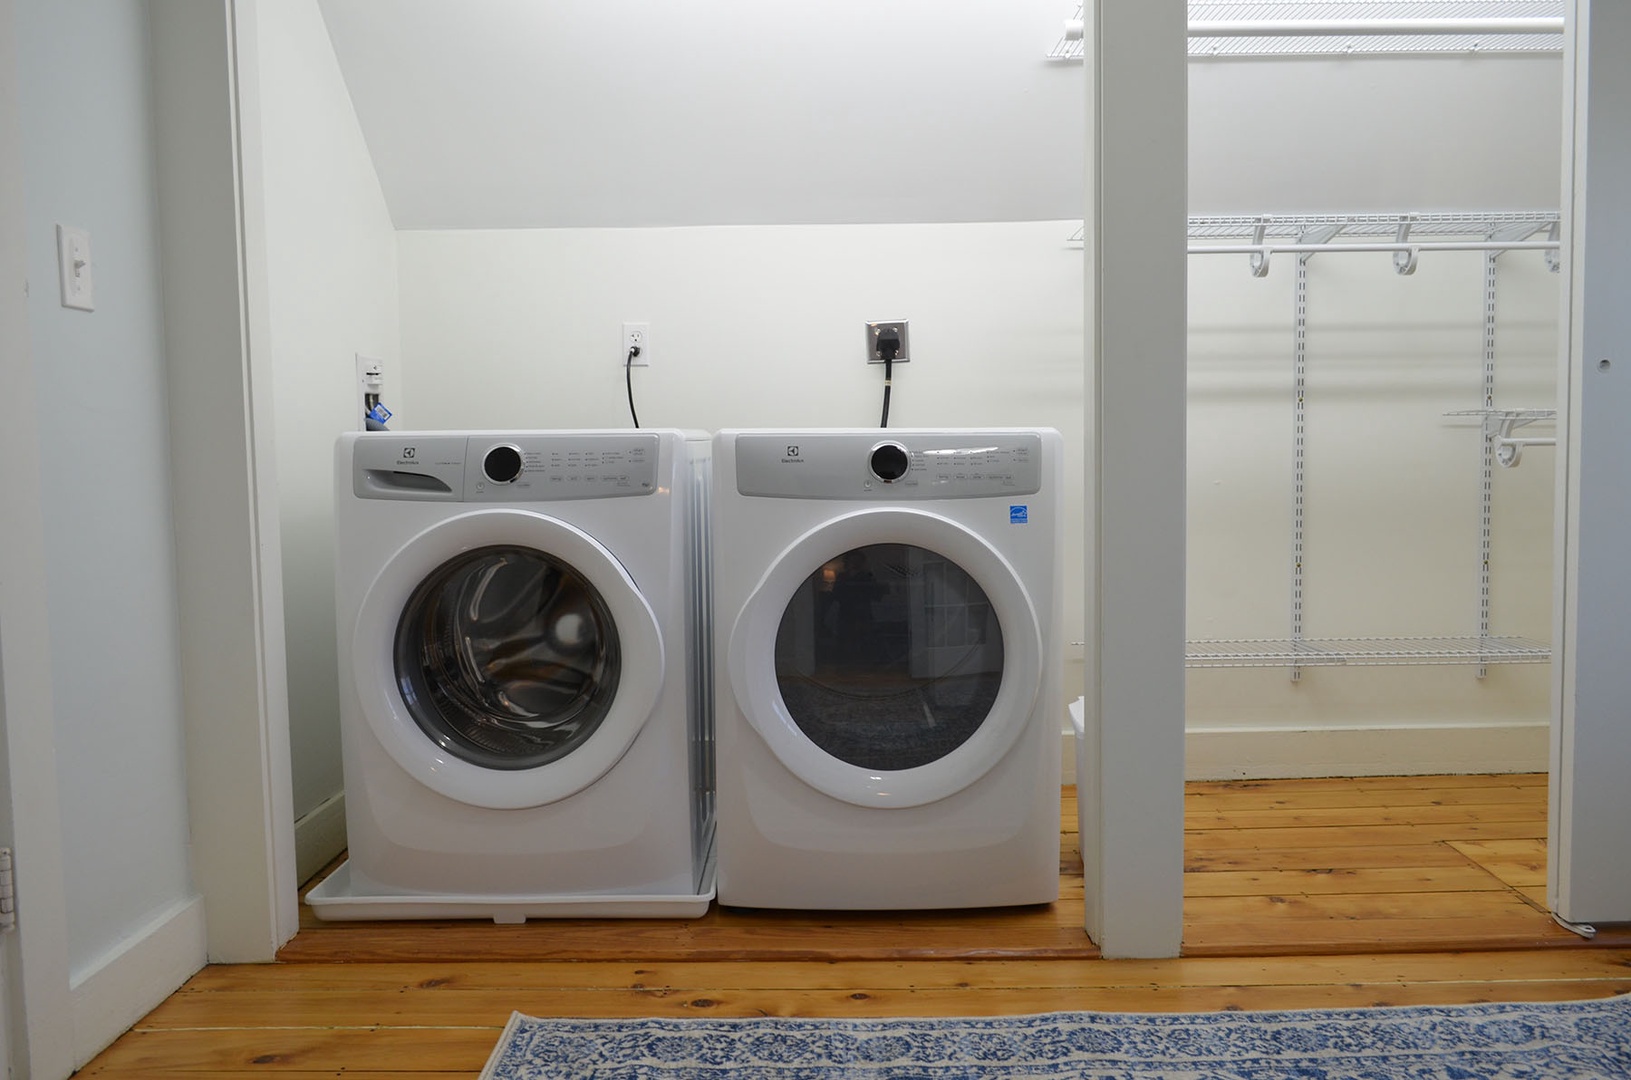 The shared walk-in closet/laundry room connects the bedrooms.